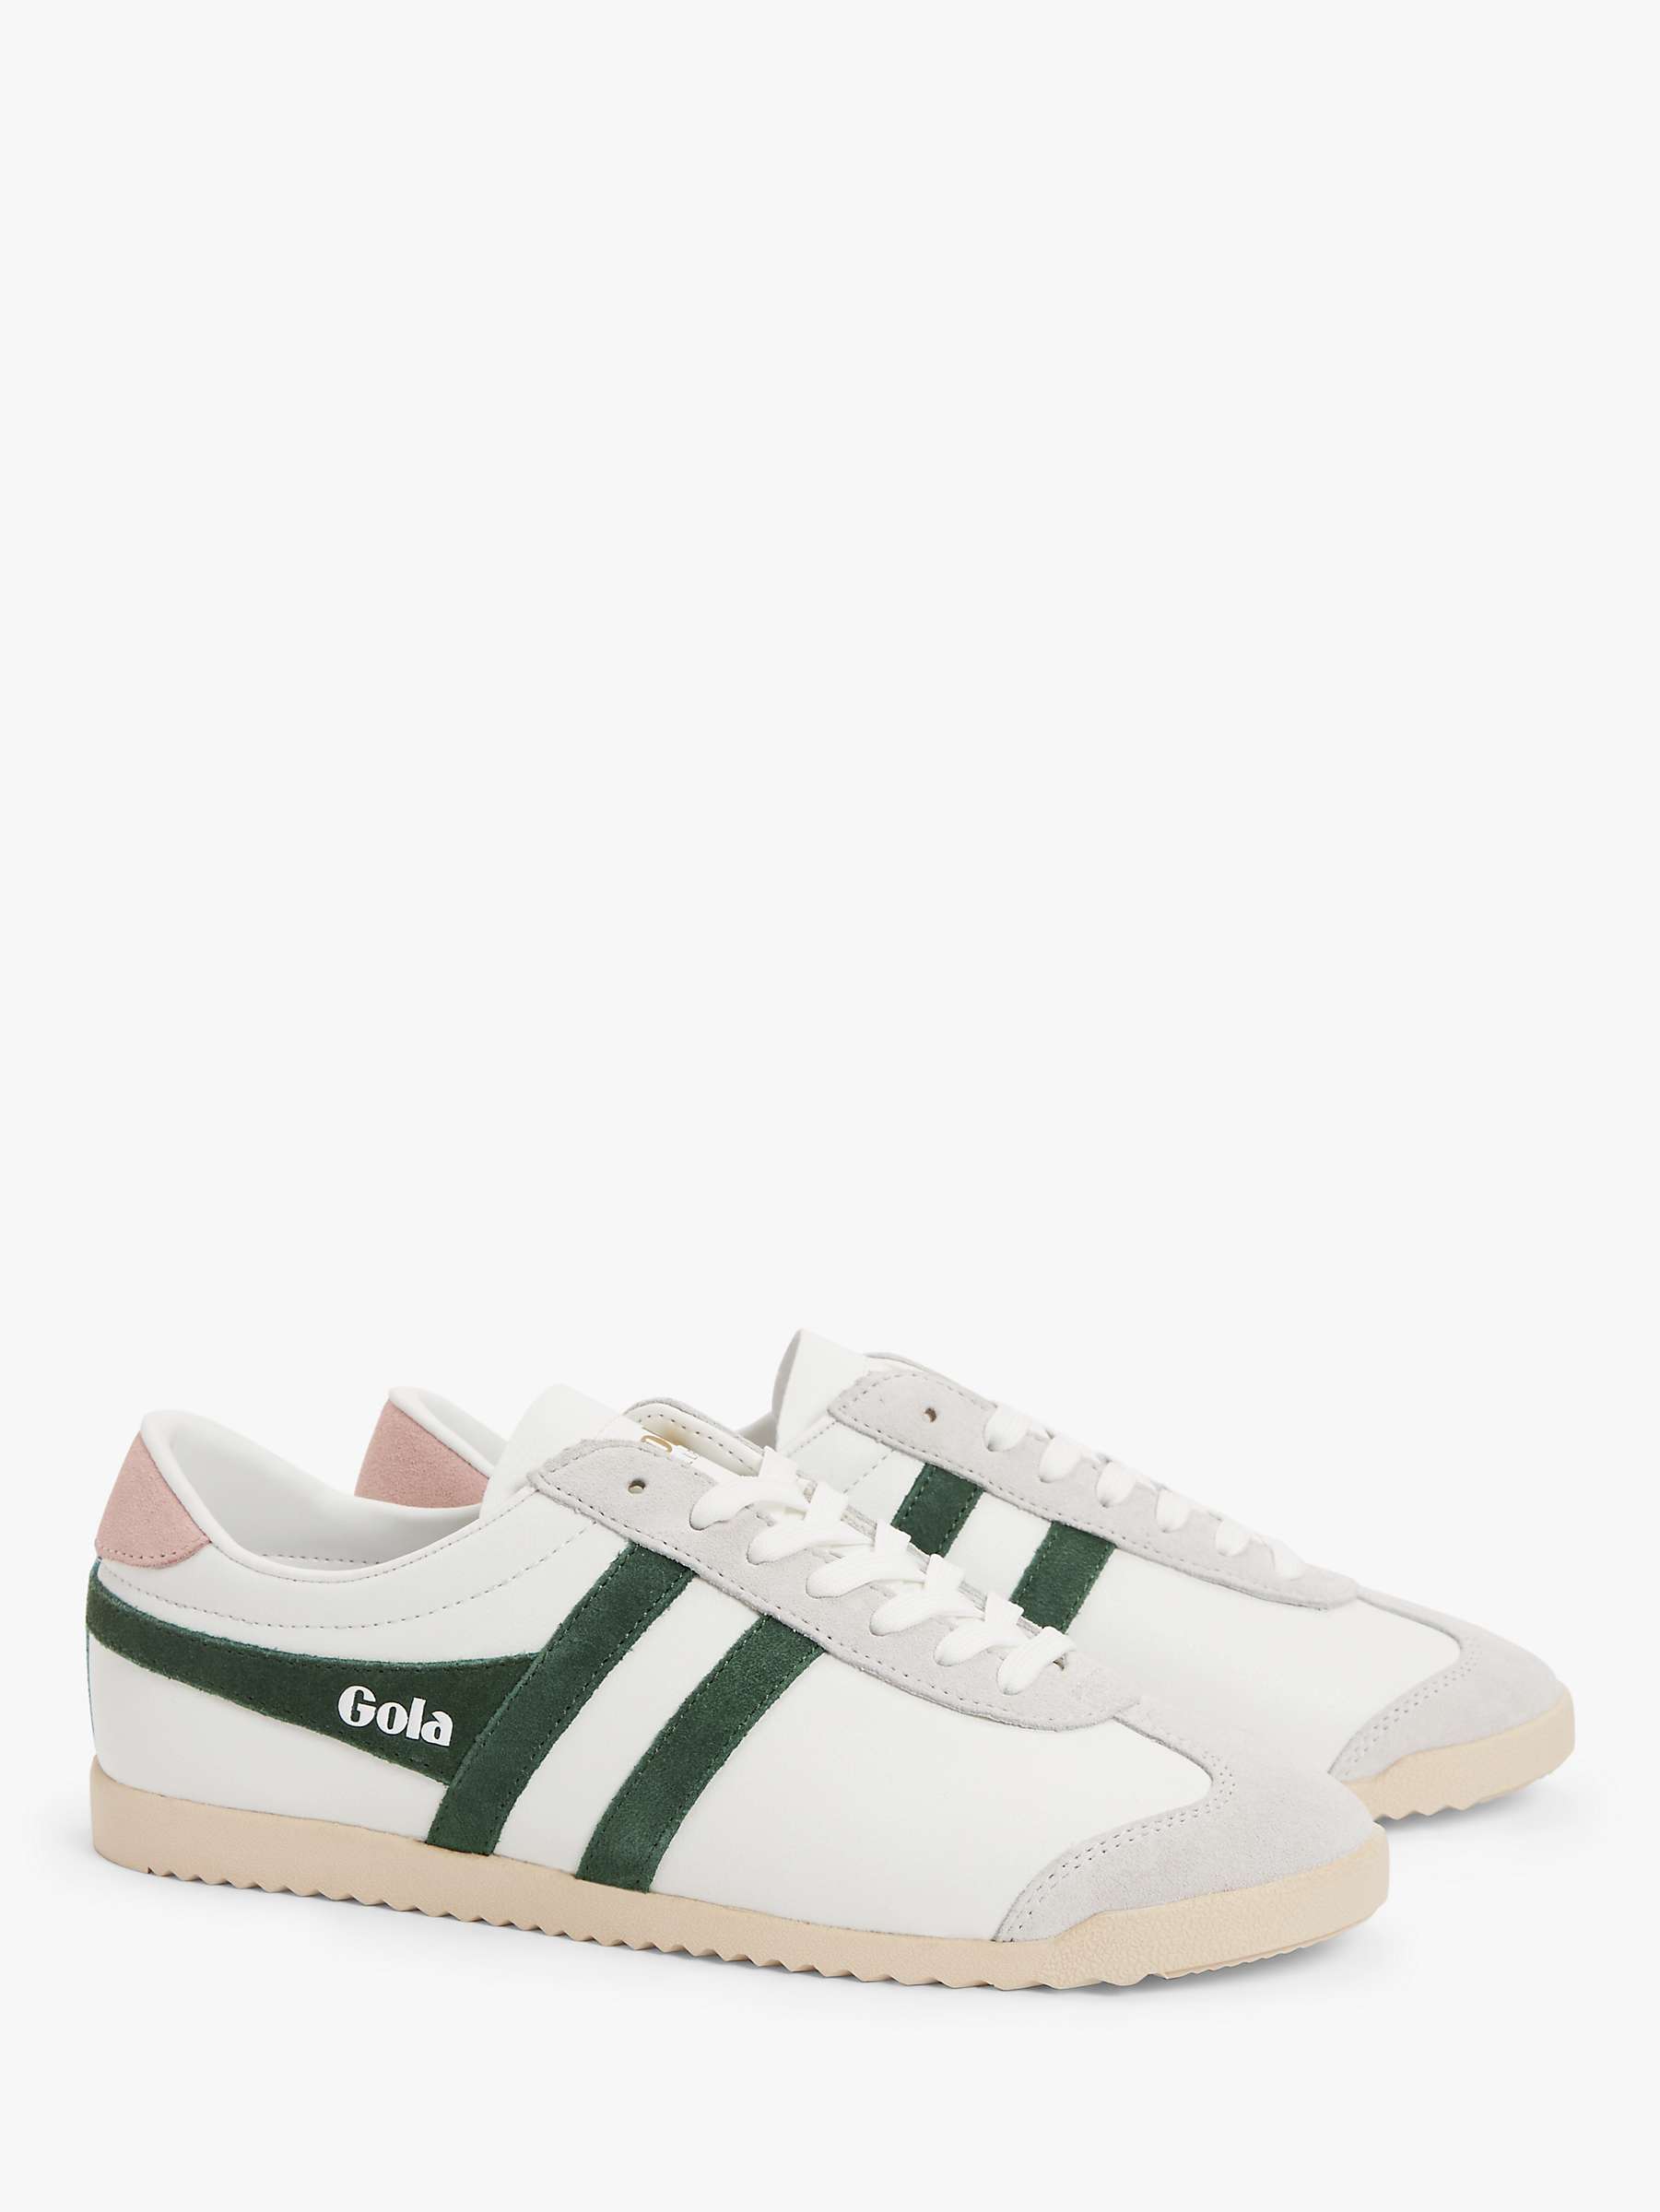 Gola Classics Bullet Blaze Lace Up Trainers, White/Green at John Lewis ...